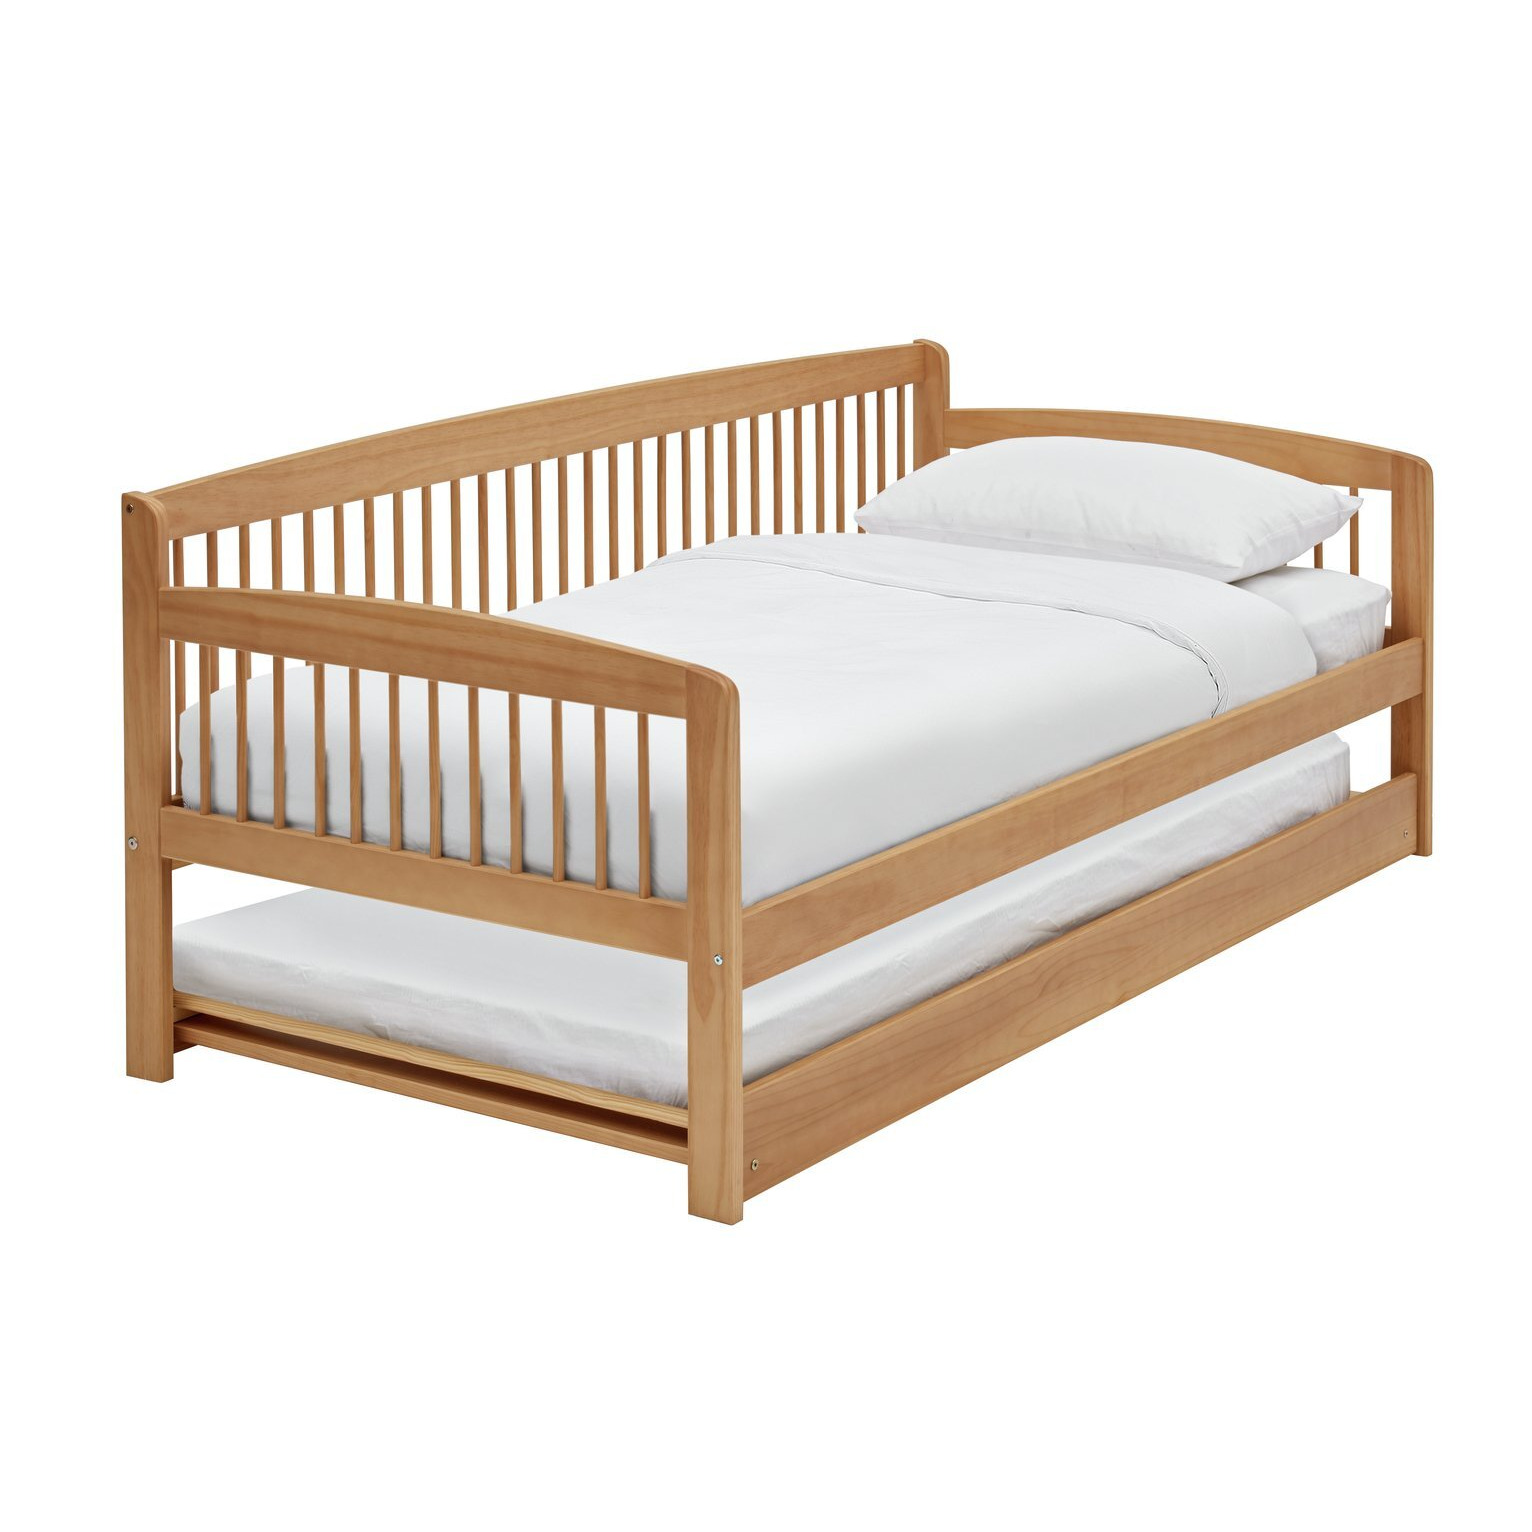 Argos Home Andover Wooden Day Bed with Trundle - Pine - image 1